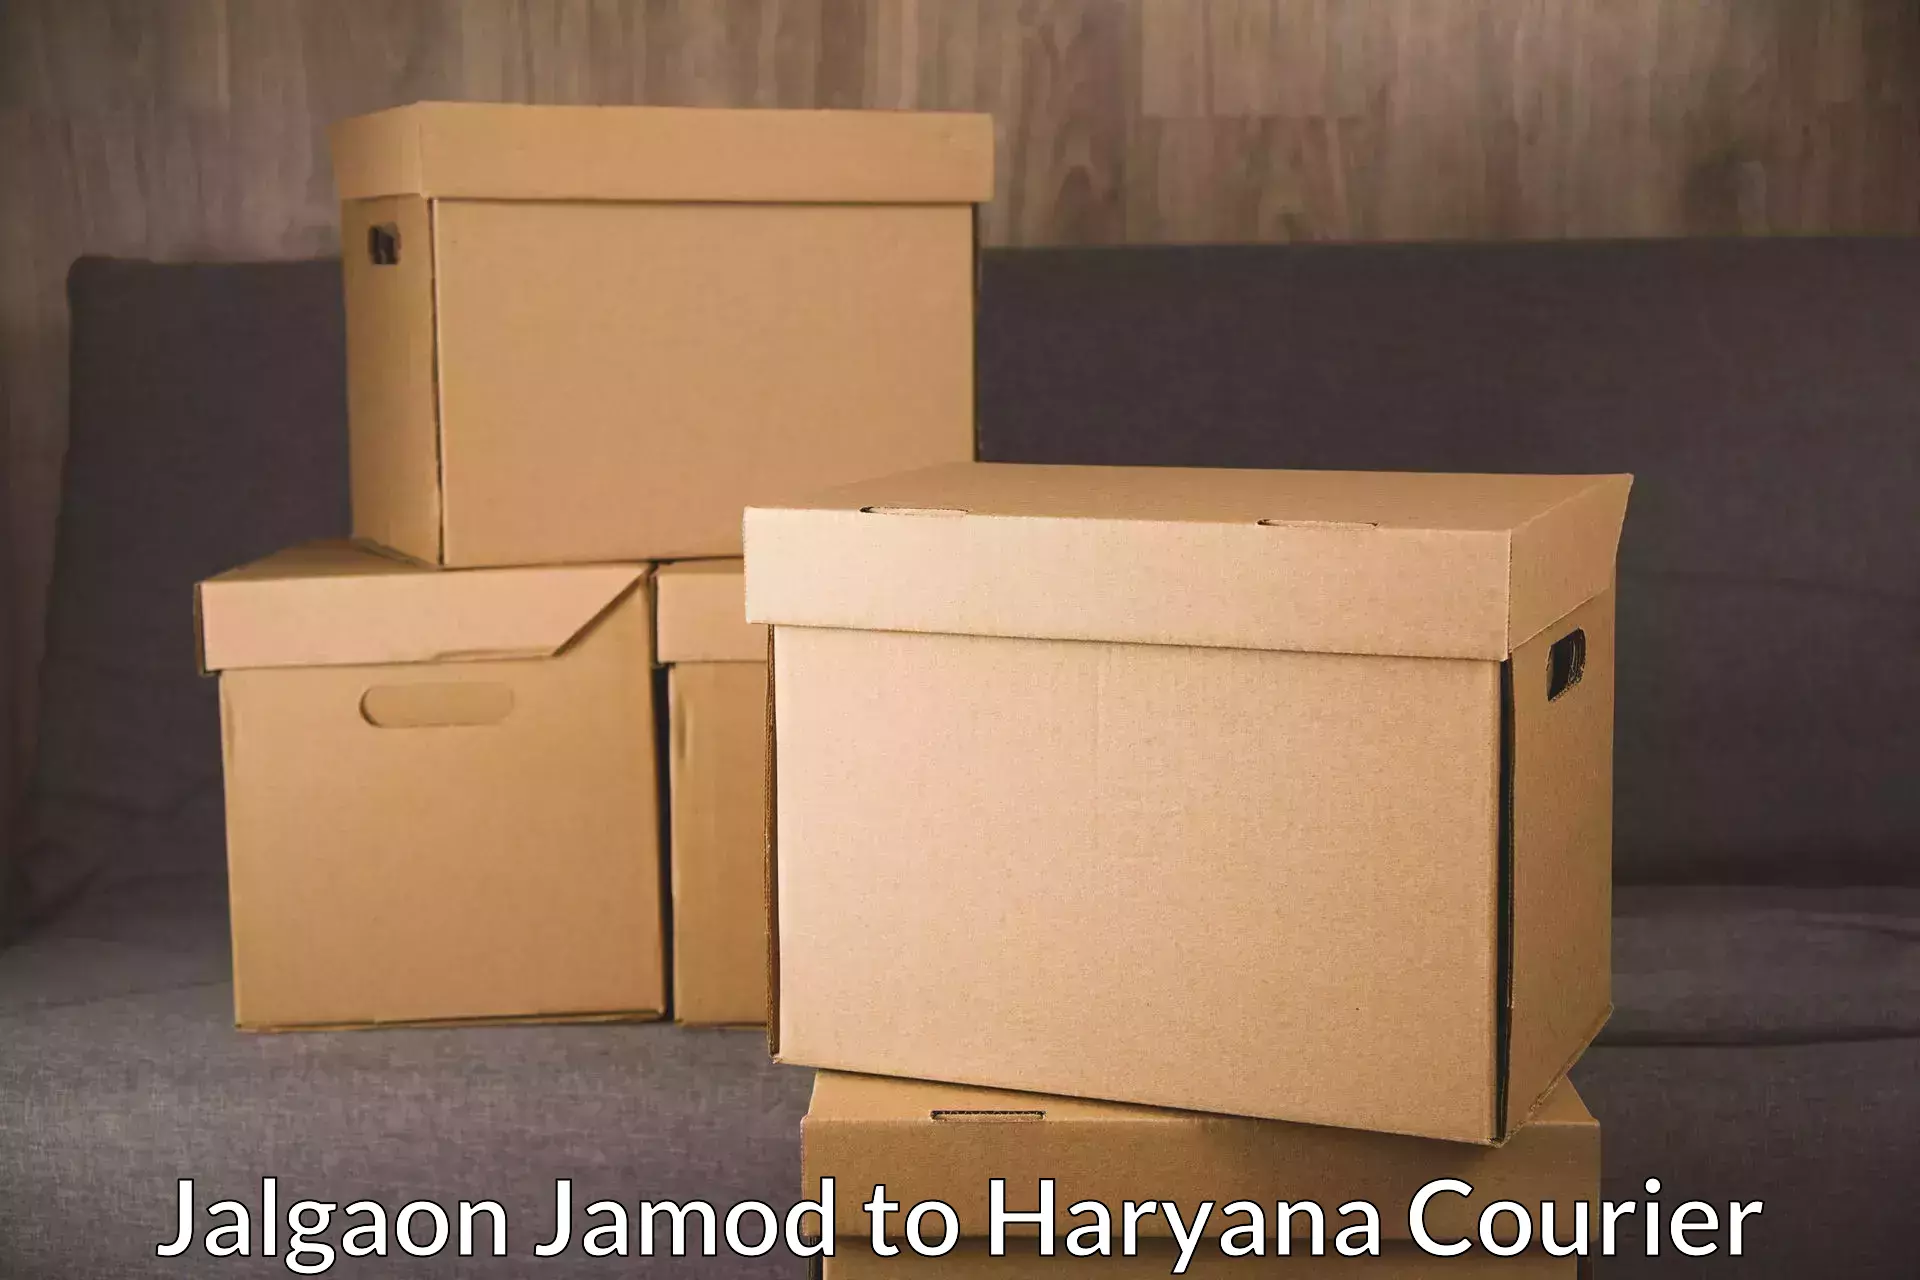 Courier services in Jalgaon Jamod to Haryana